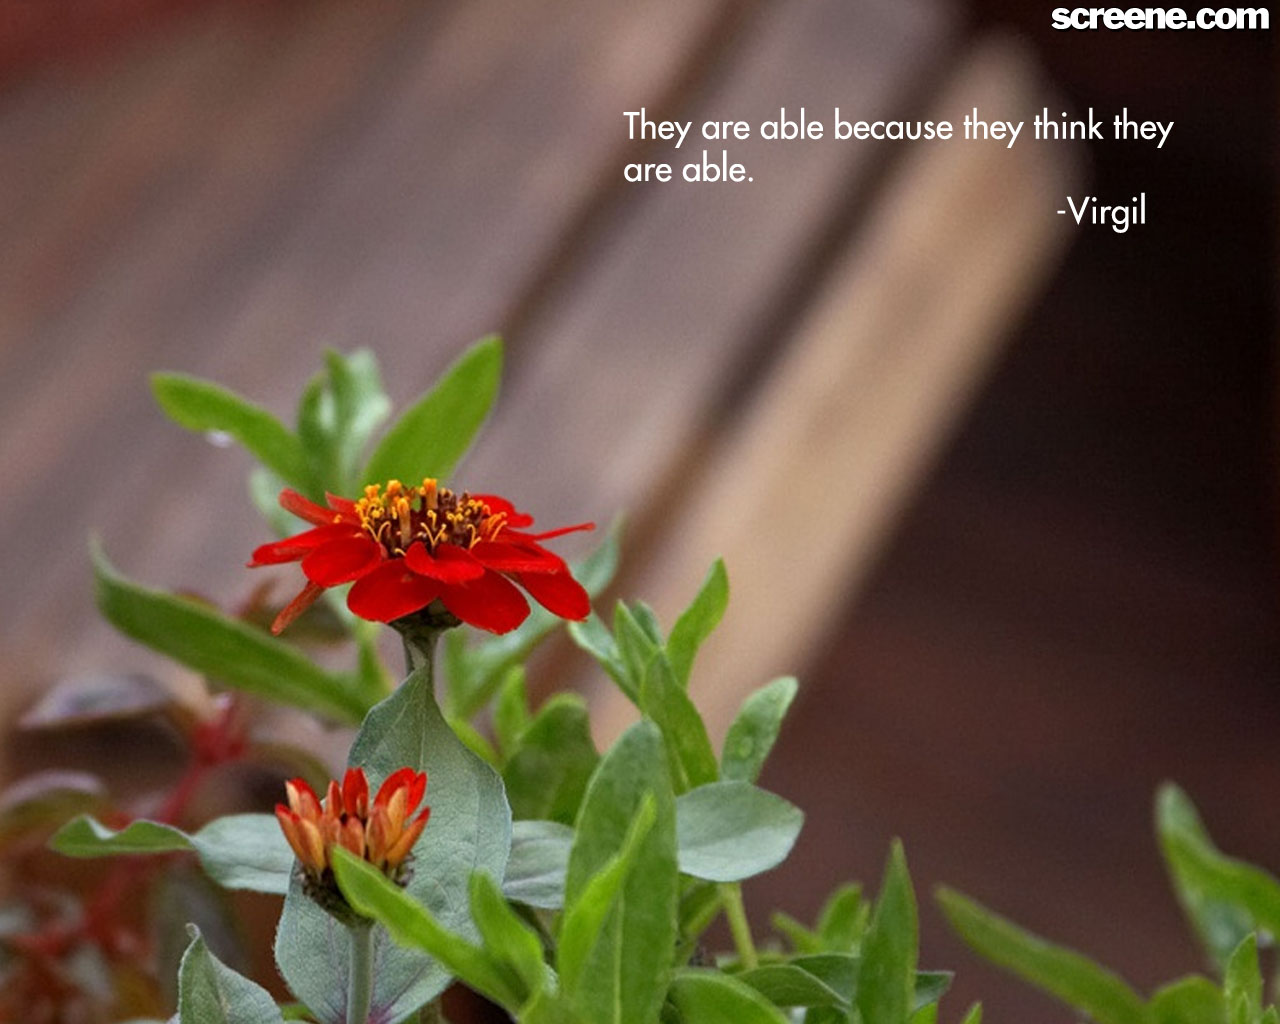 They are able because they think they are able  - Virgil